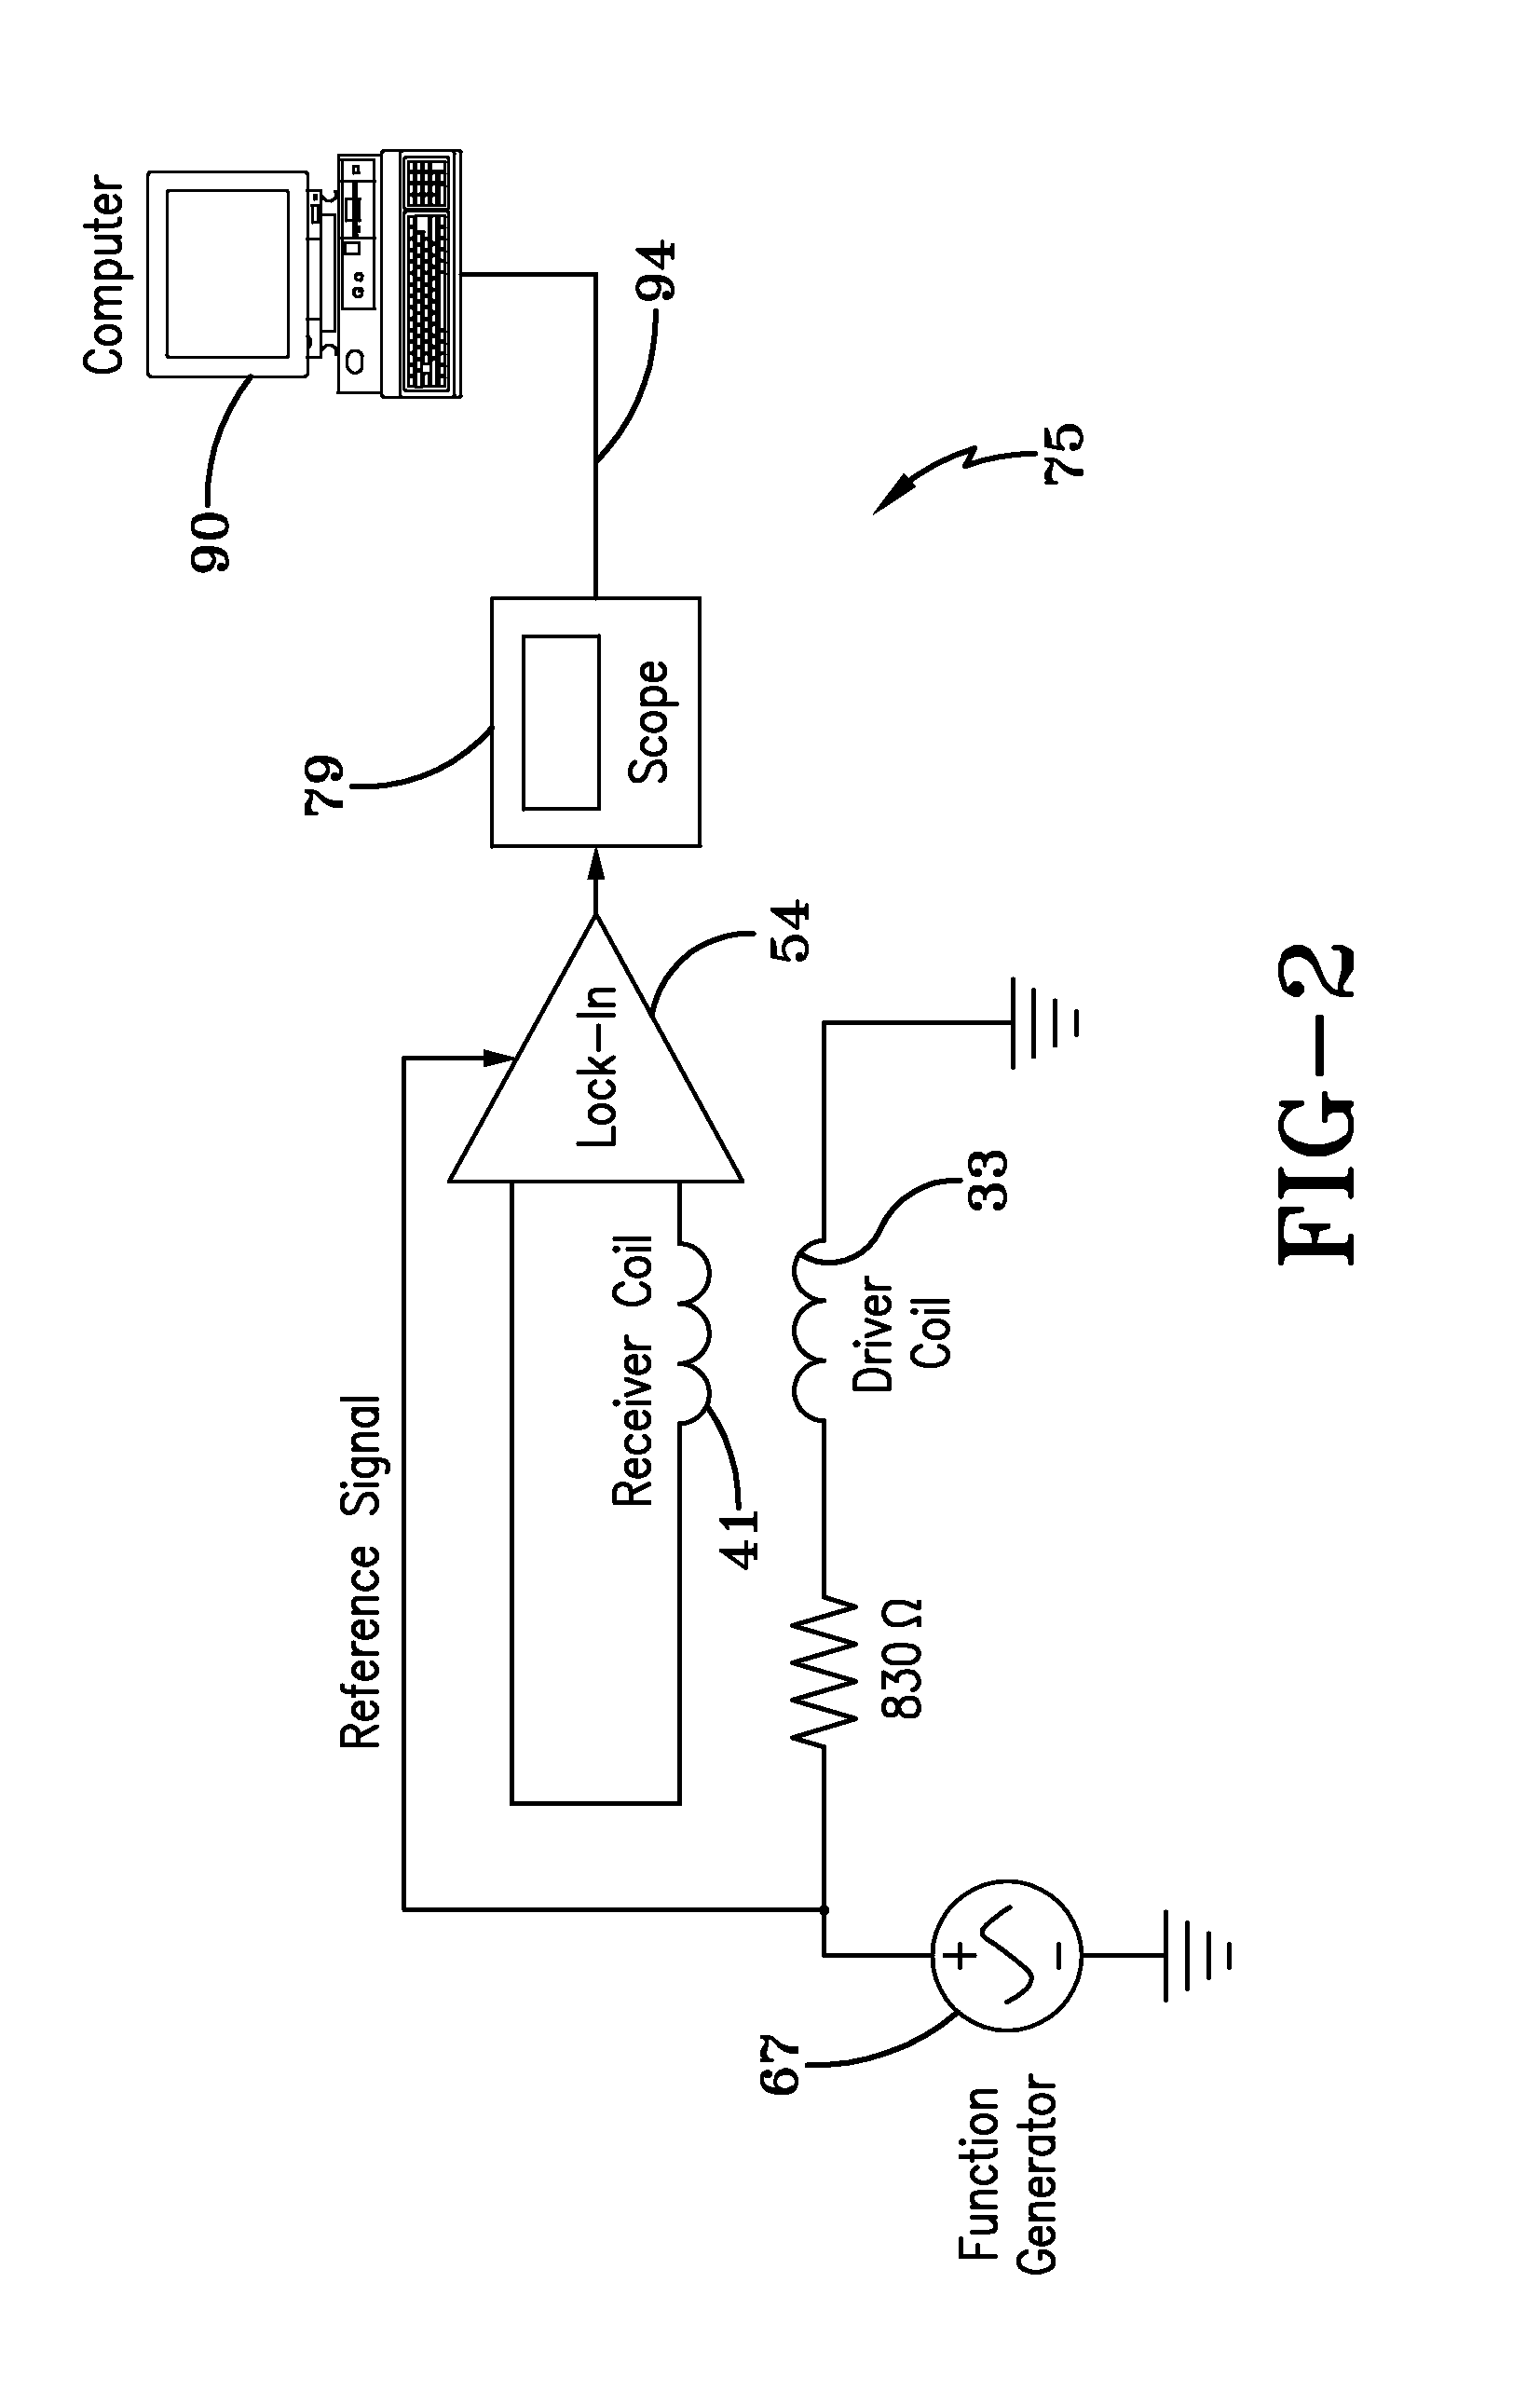 Electromagnetic system and method